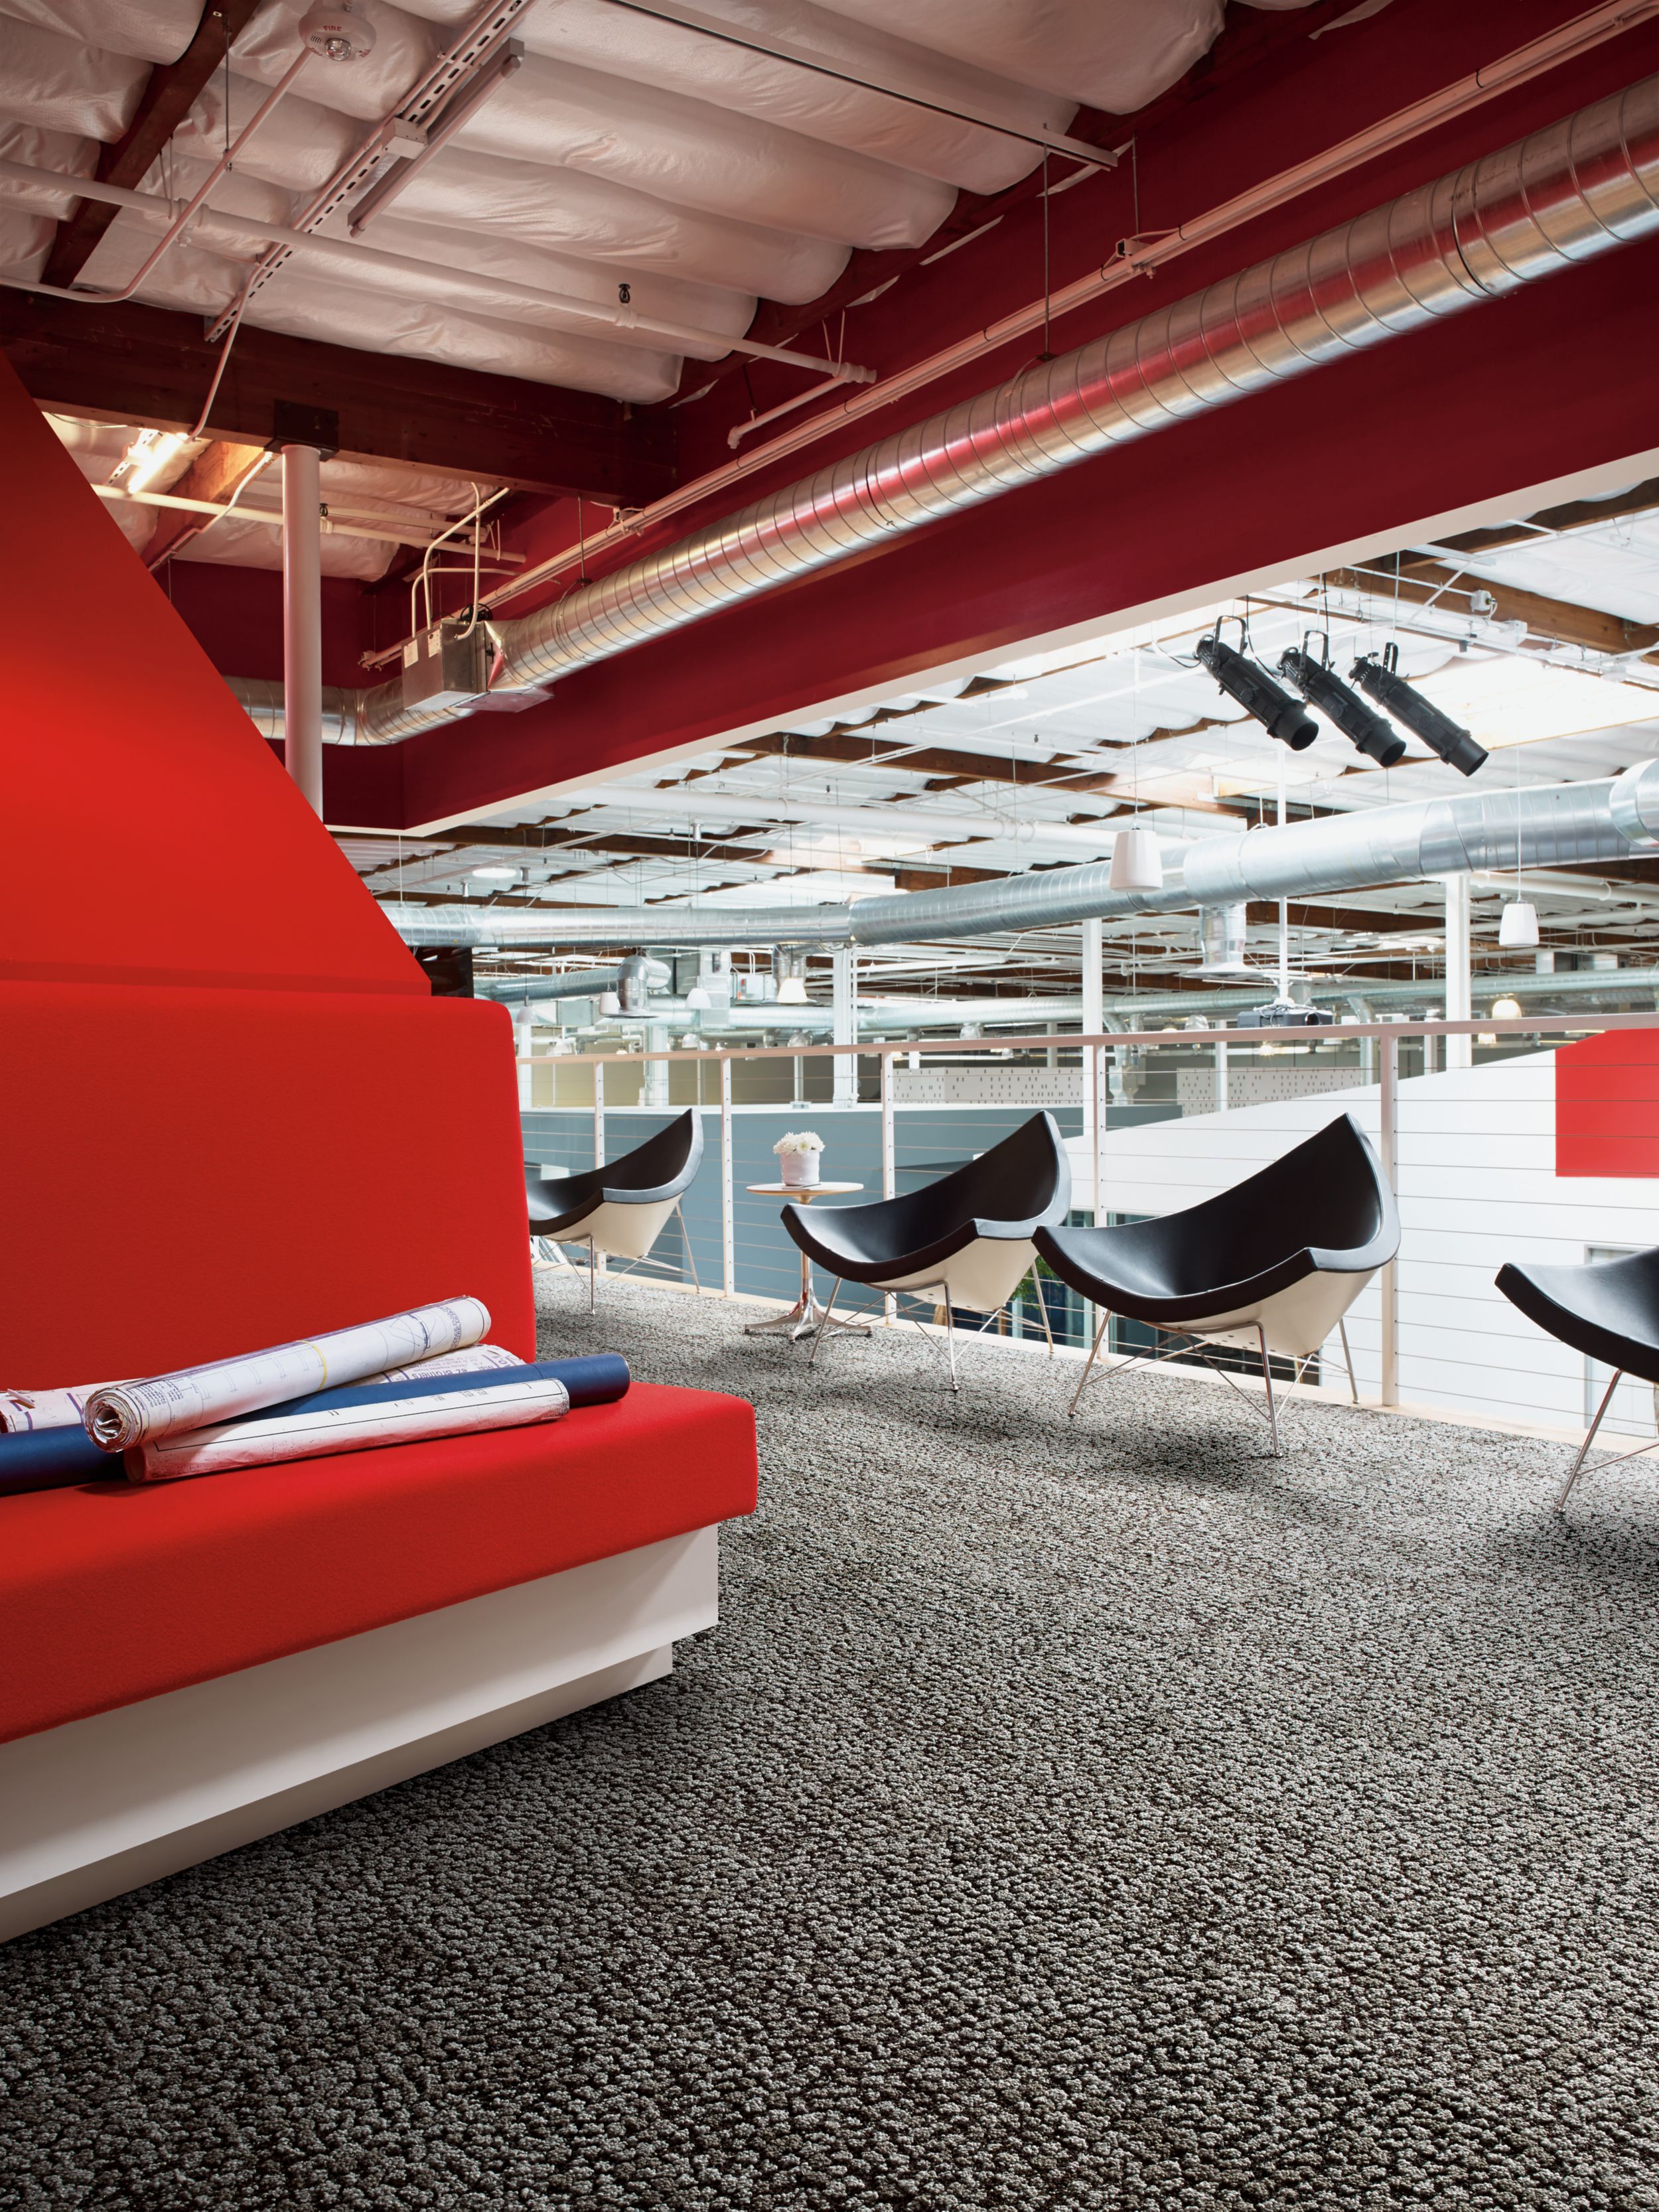 image Interface HN840 plank carpet tile in upper level open space with red bench and black chairs numéro 1